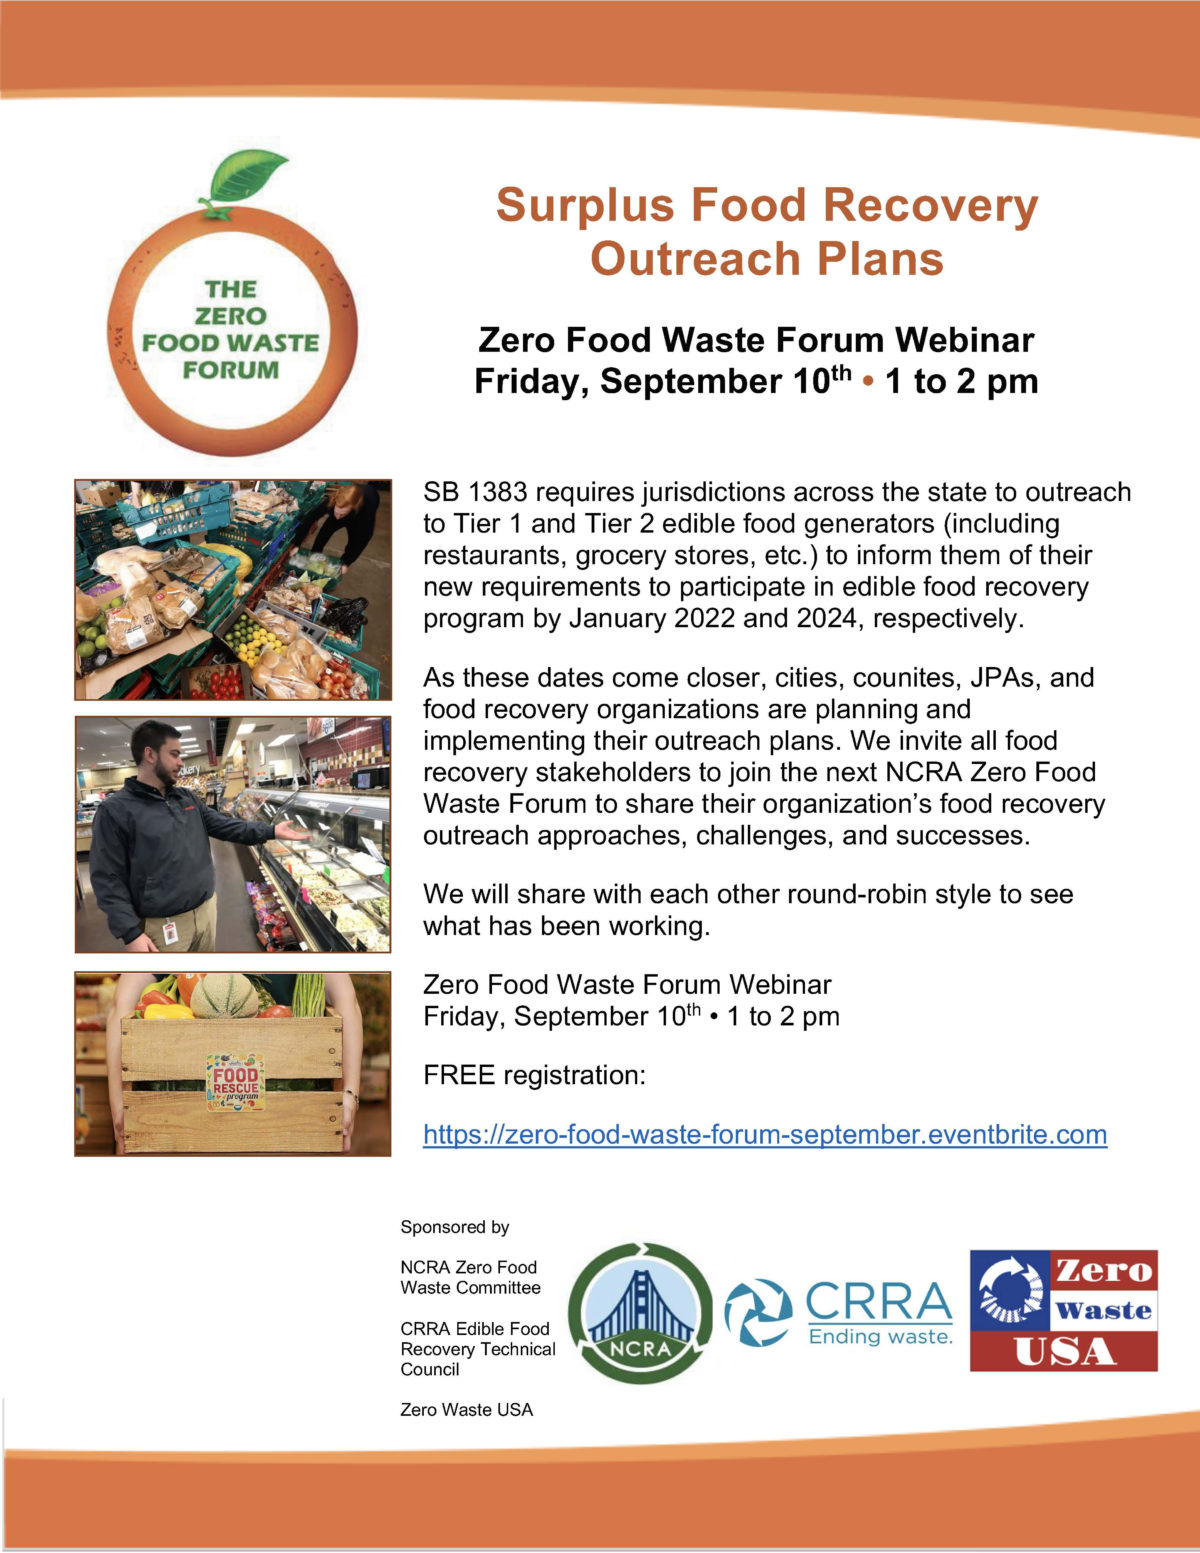 Surplus Recovery Outreach Plans, 9/10/21